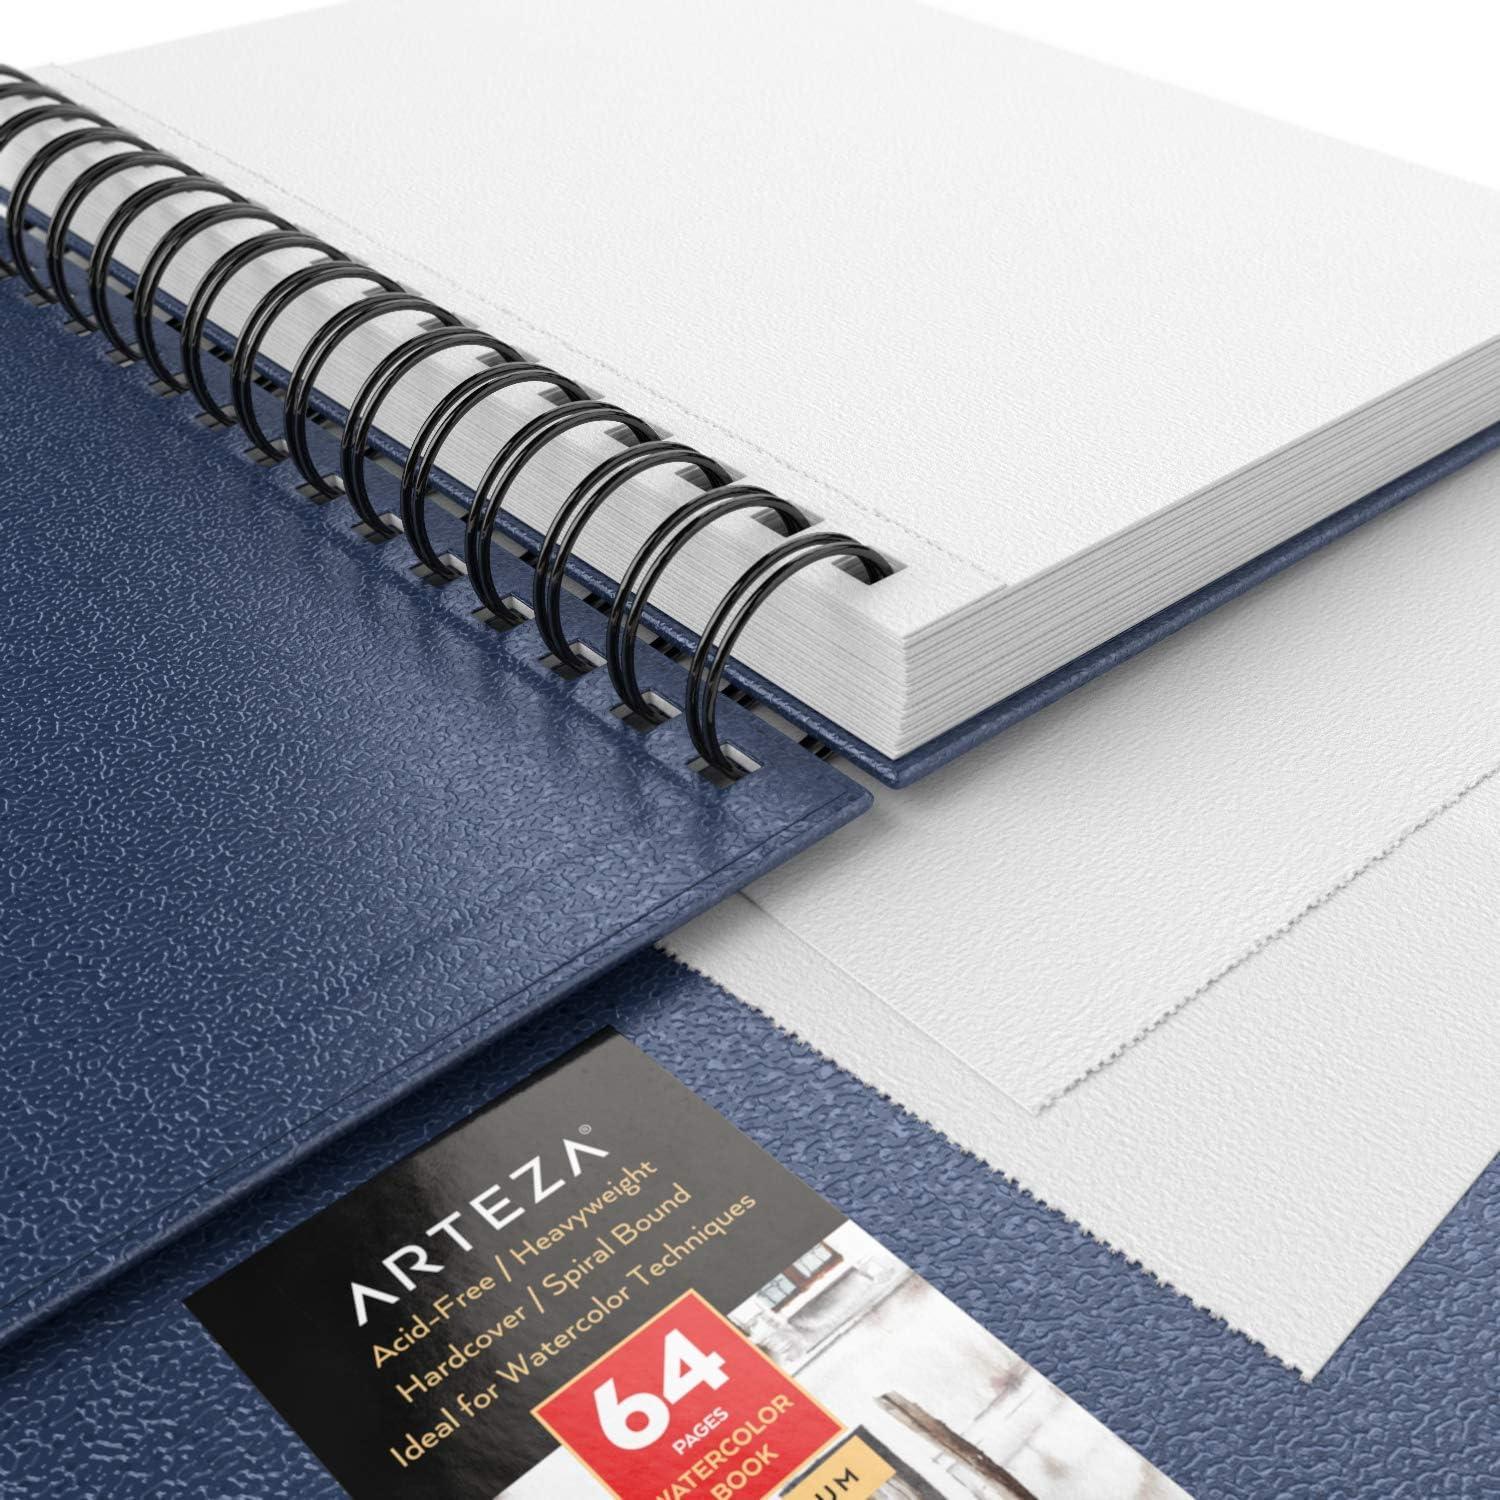 Arteza Watercolor Sketchbooks, 5.5x8.5-inch, 3-Pack, Blue Hardcover  Journal, 96 Sheets, 140lb/300gsm Watercolor Paper Pad, Spiral Bound Book  for Watercolor, Gouache, Acrylics, Pencils, Wet & Dry Media 5.5x8.5 inch -  3 pack Blue